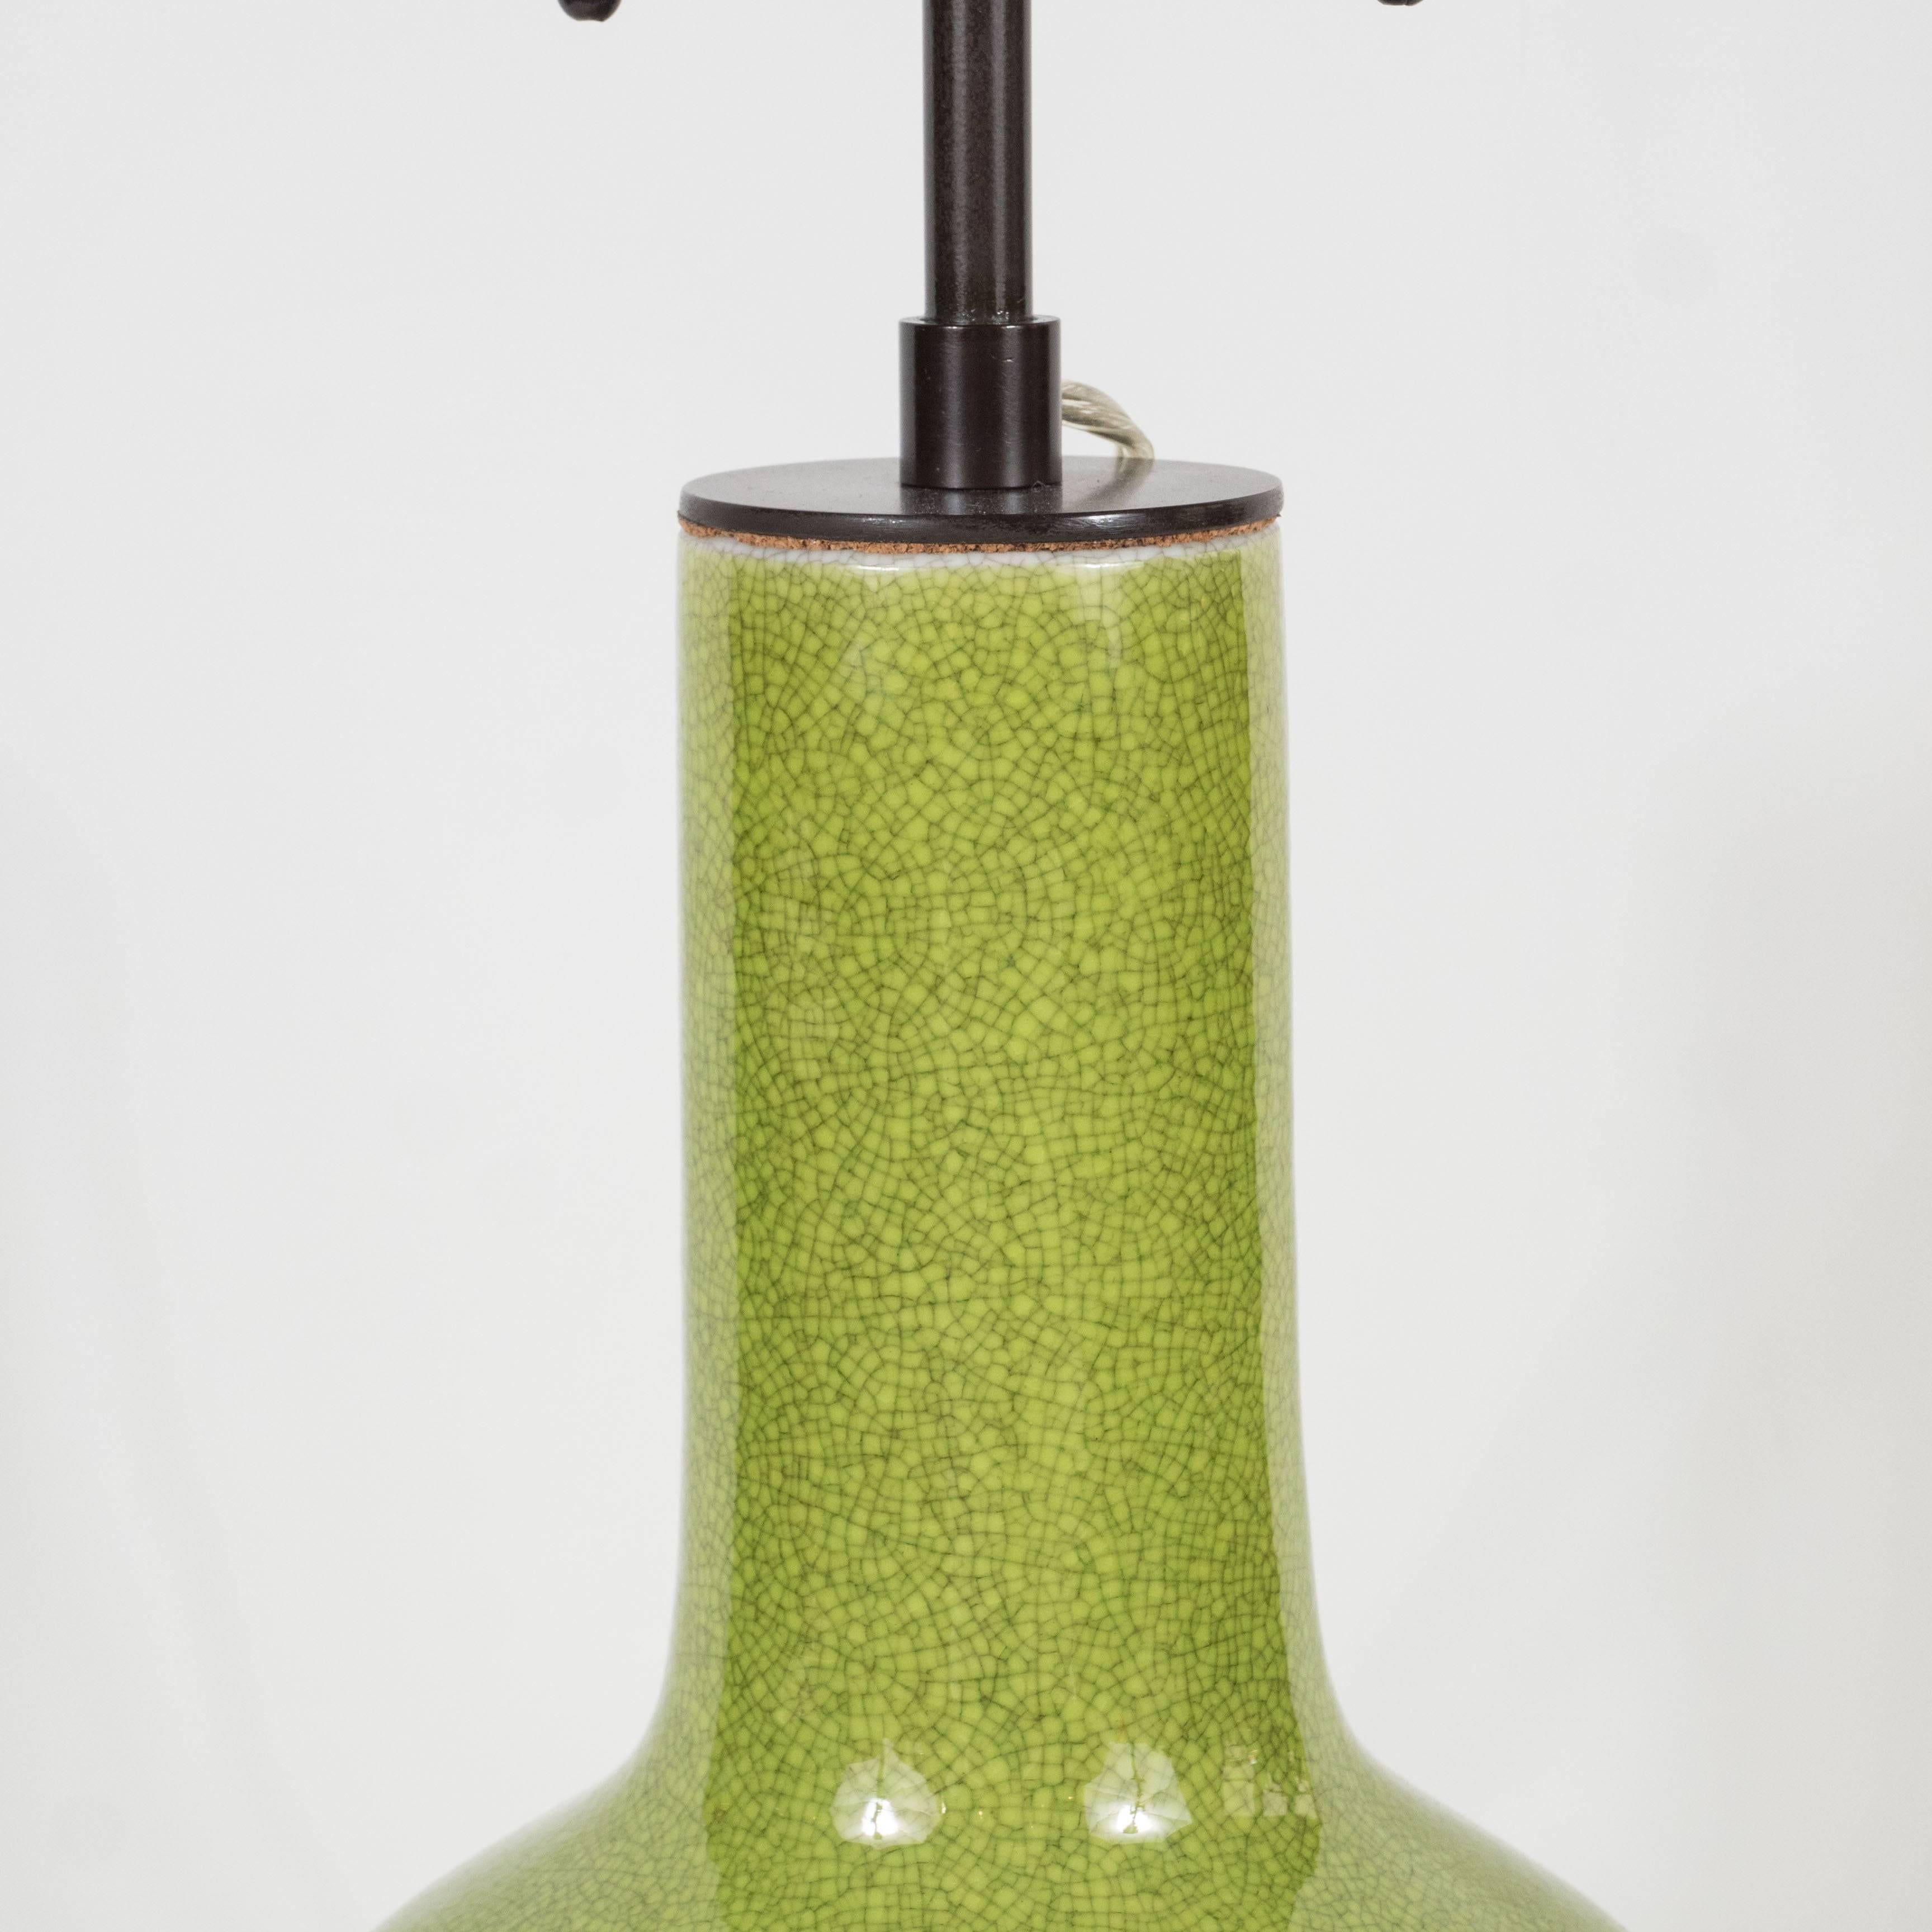 Chinese Chartreuse Craquelure Vase In Excellent Condition For Sale In New York, NY